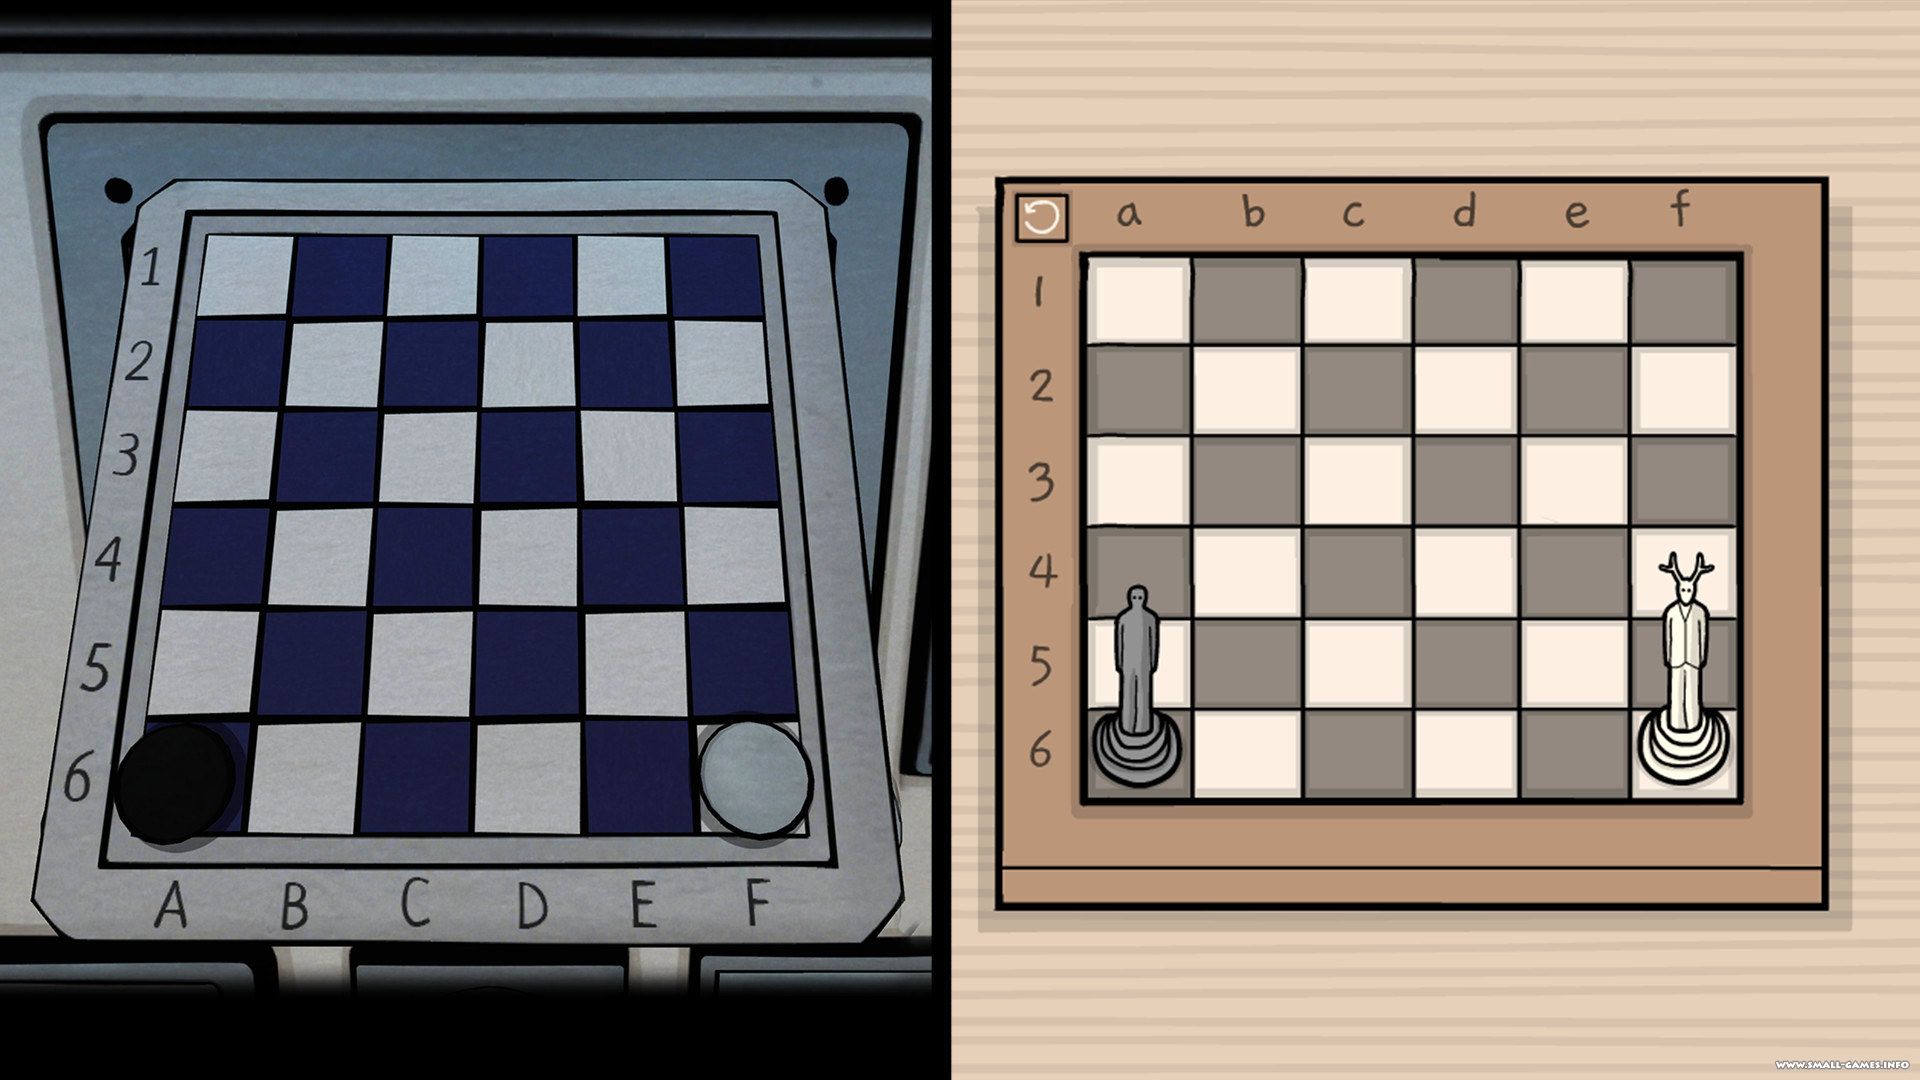 The past within rusty. Игра the past within. Игра Rusty Lake the past within. The past within шахматы. Игра the past within Lite.